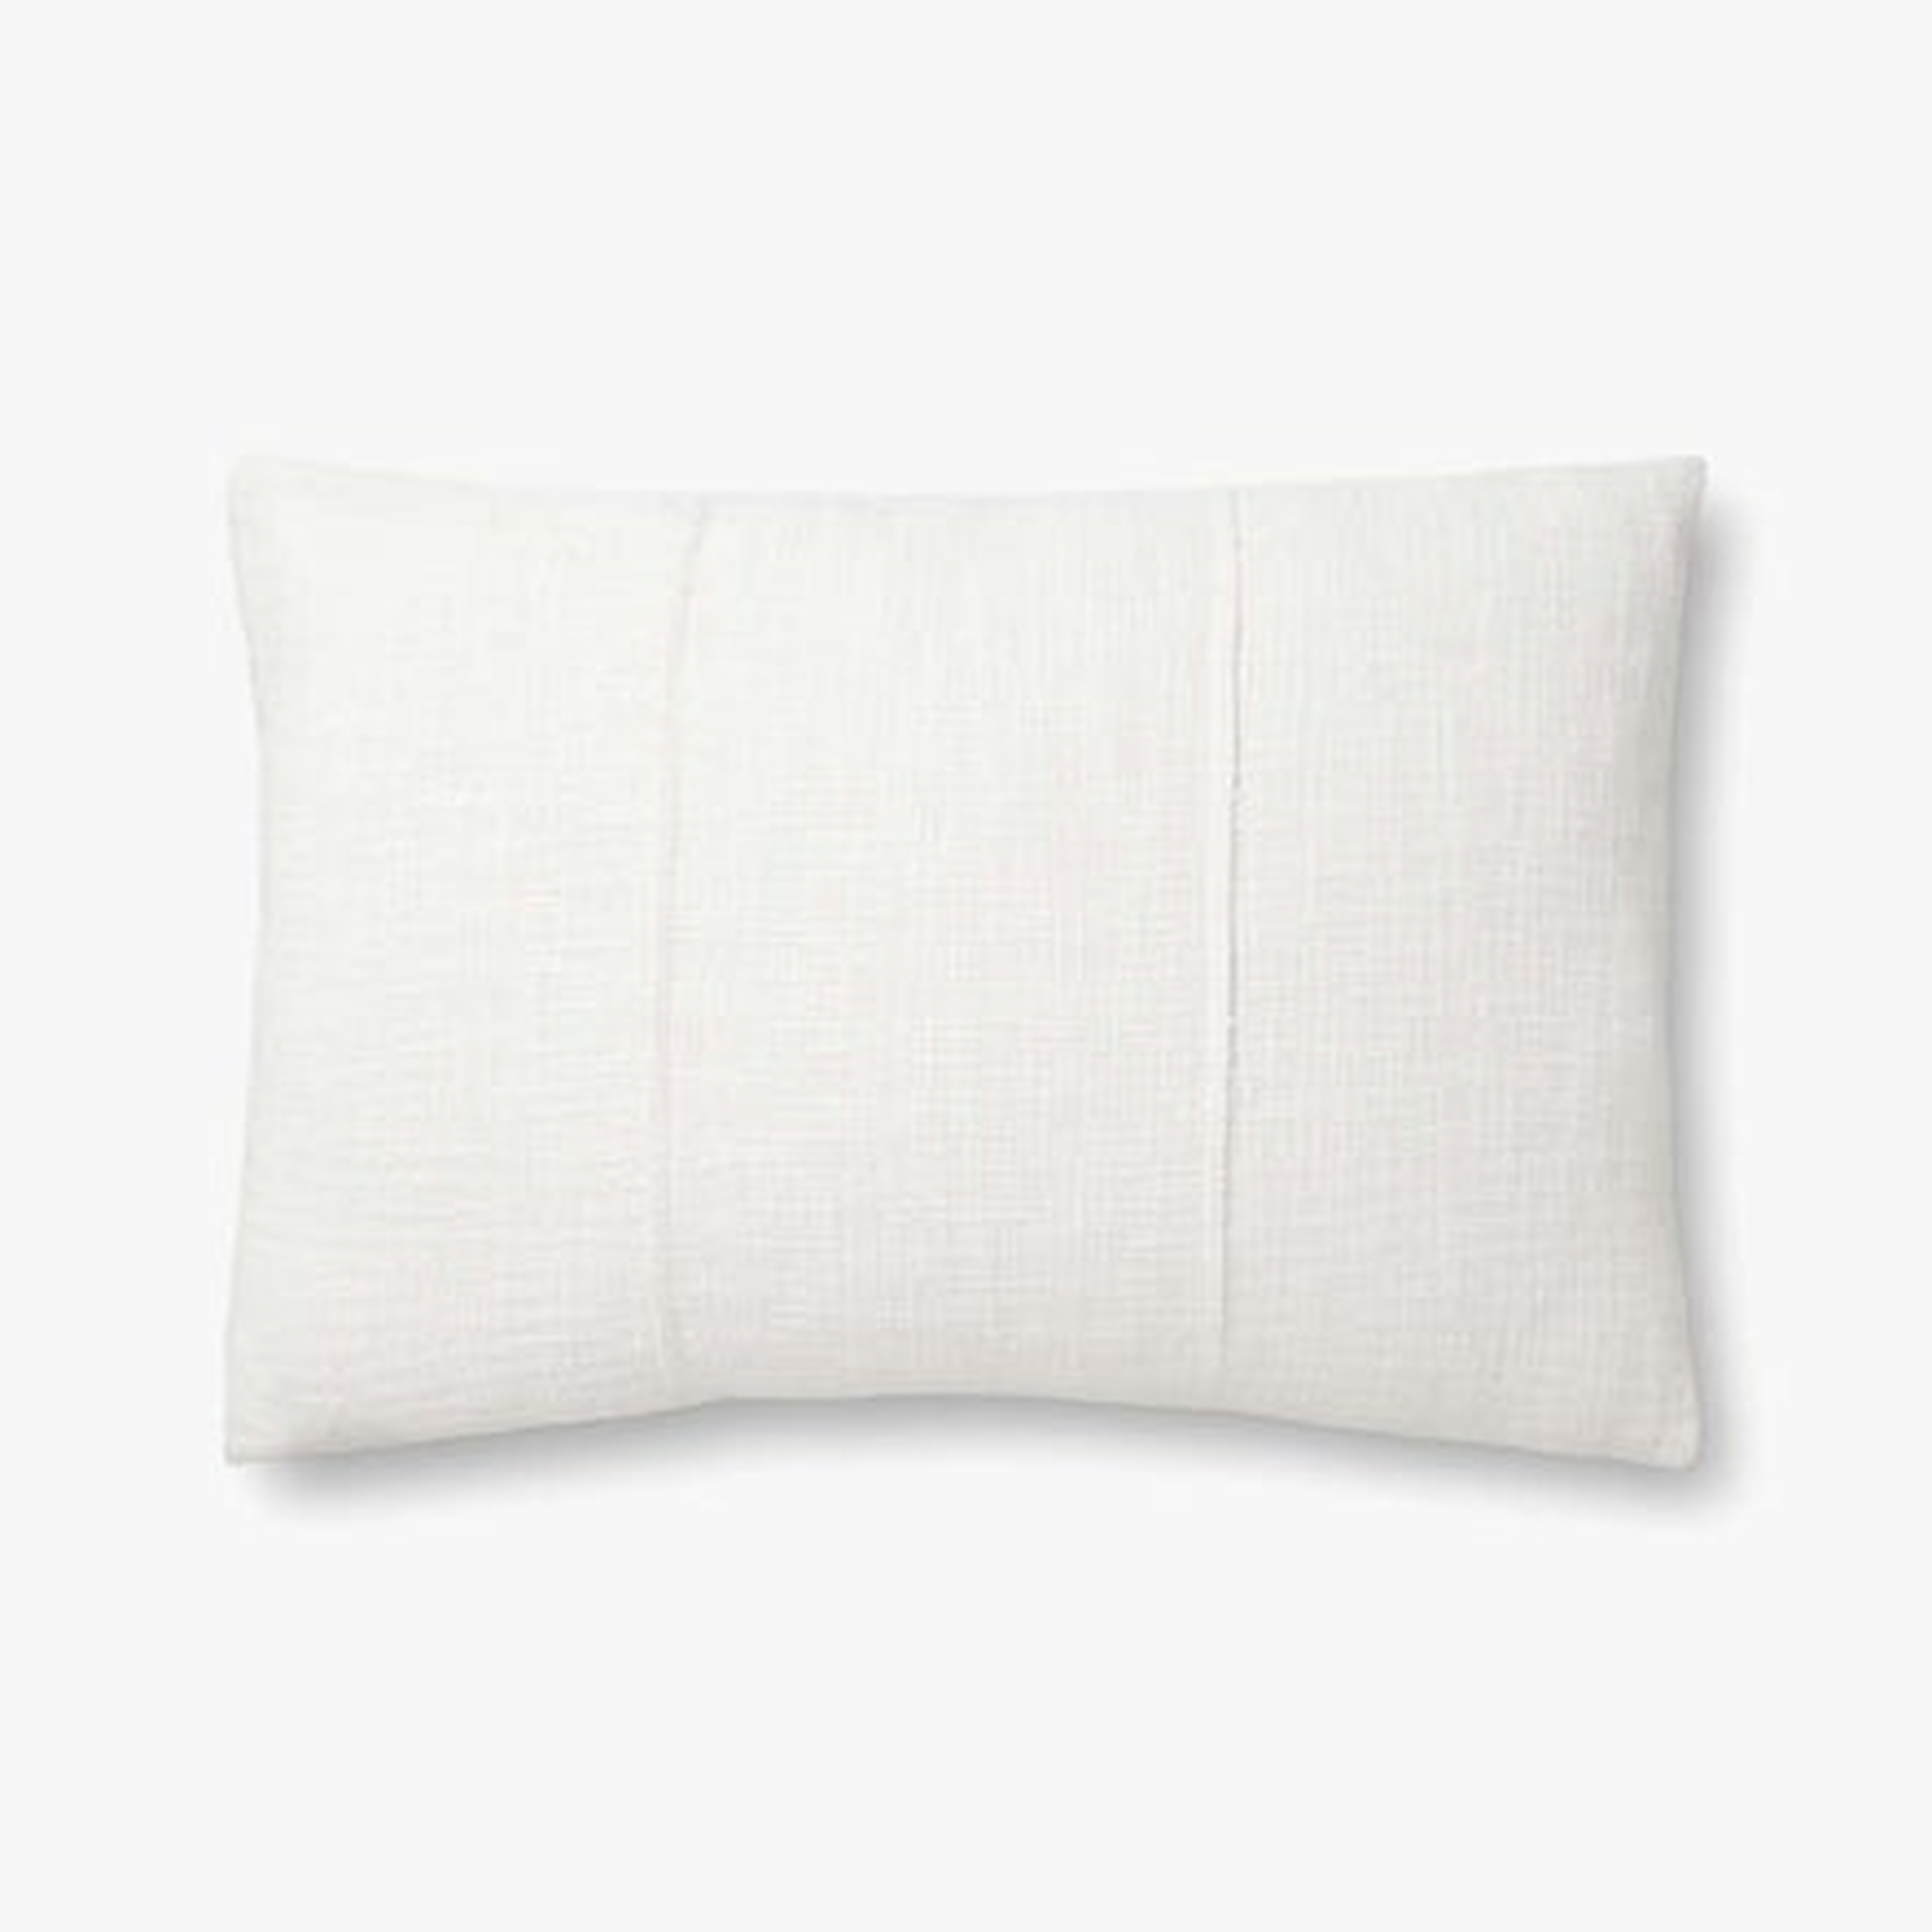 PILLOWS PMH0013 WHITE 16" x 26" Cover w/Down - Magnolia Home by Joana Gaines Crafted by Loloi Rugs